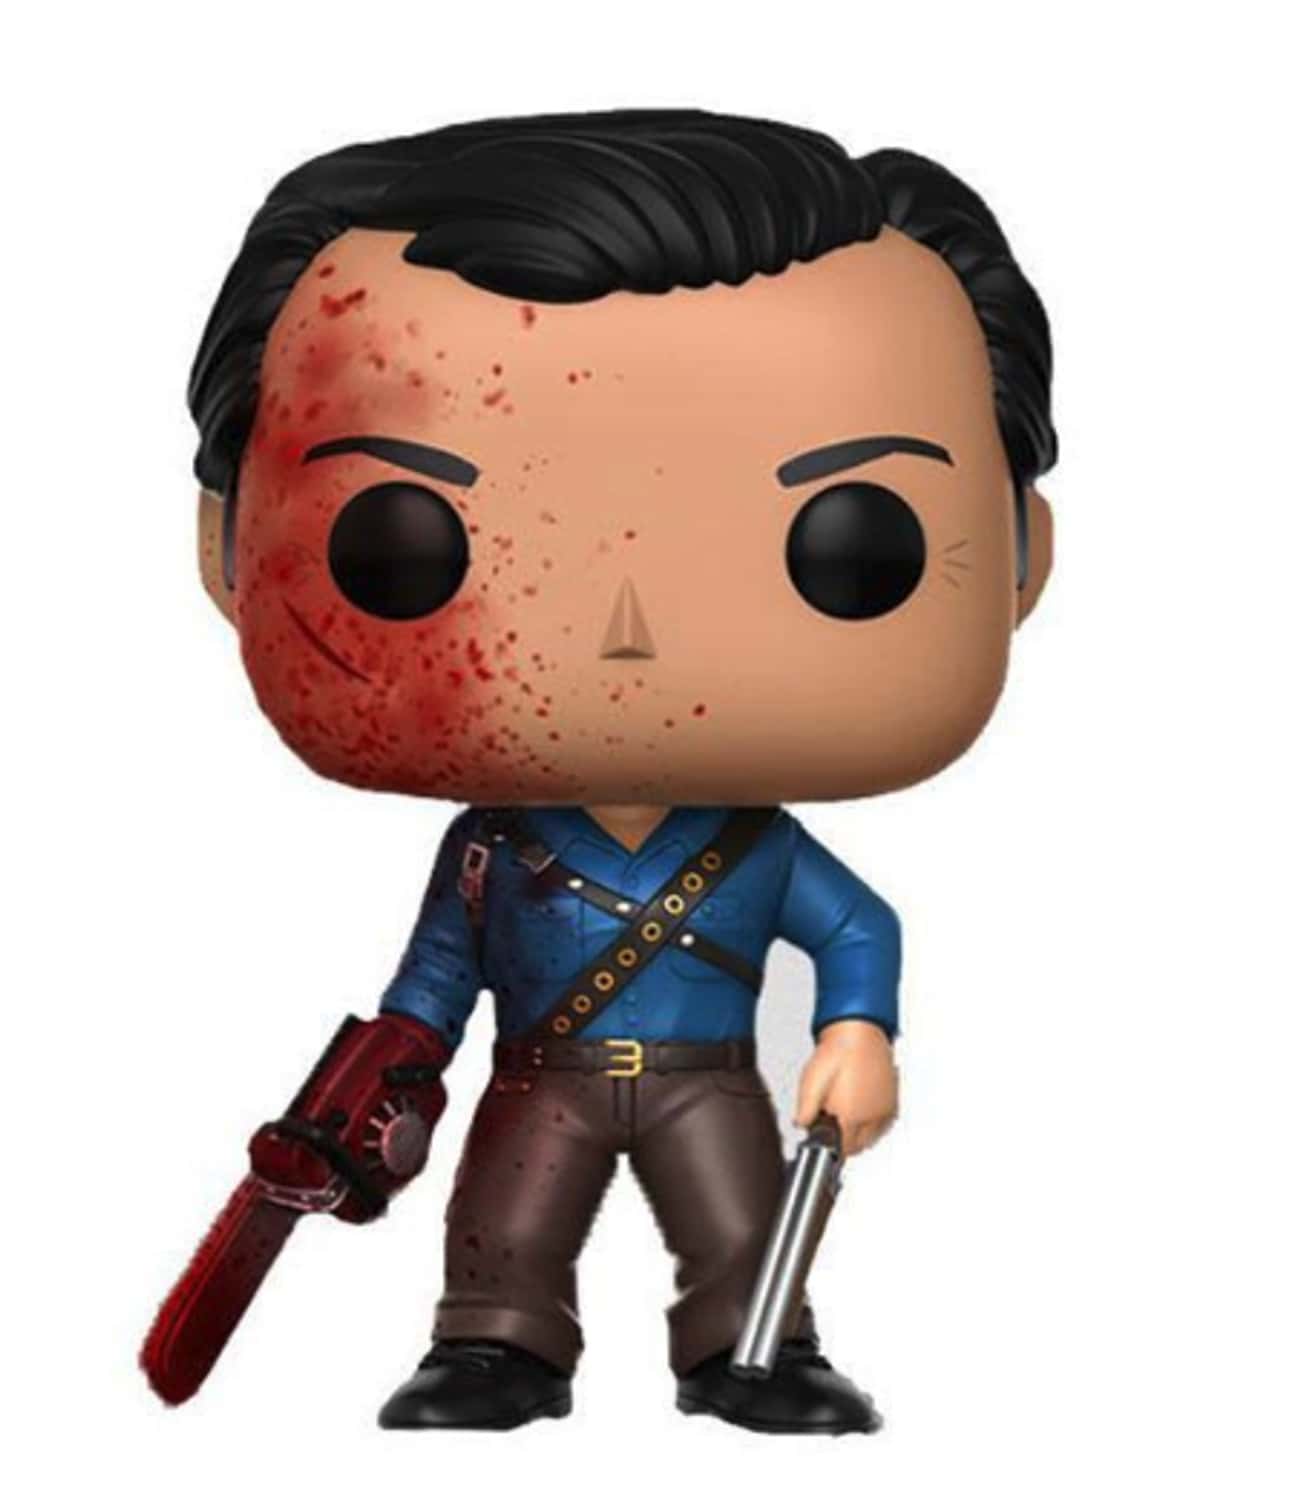 Chainsaw-Handed Ash From 'Ash vs. Evil Dead'